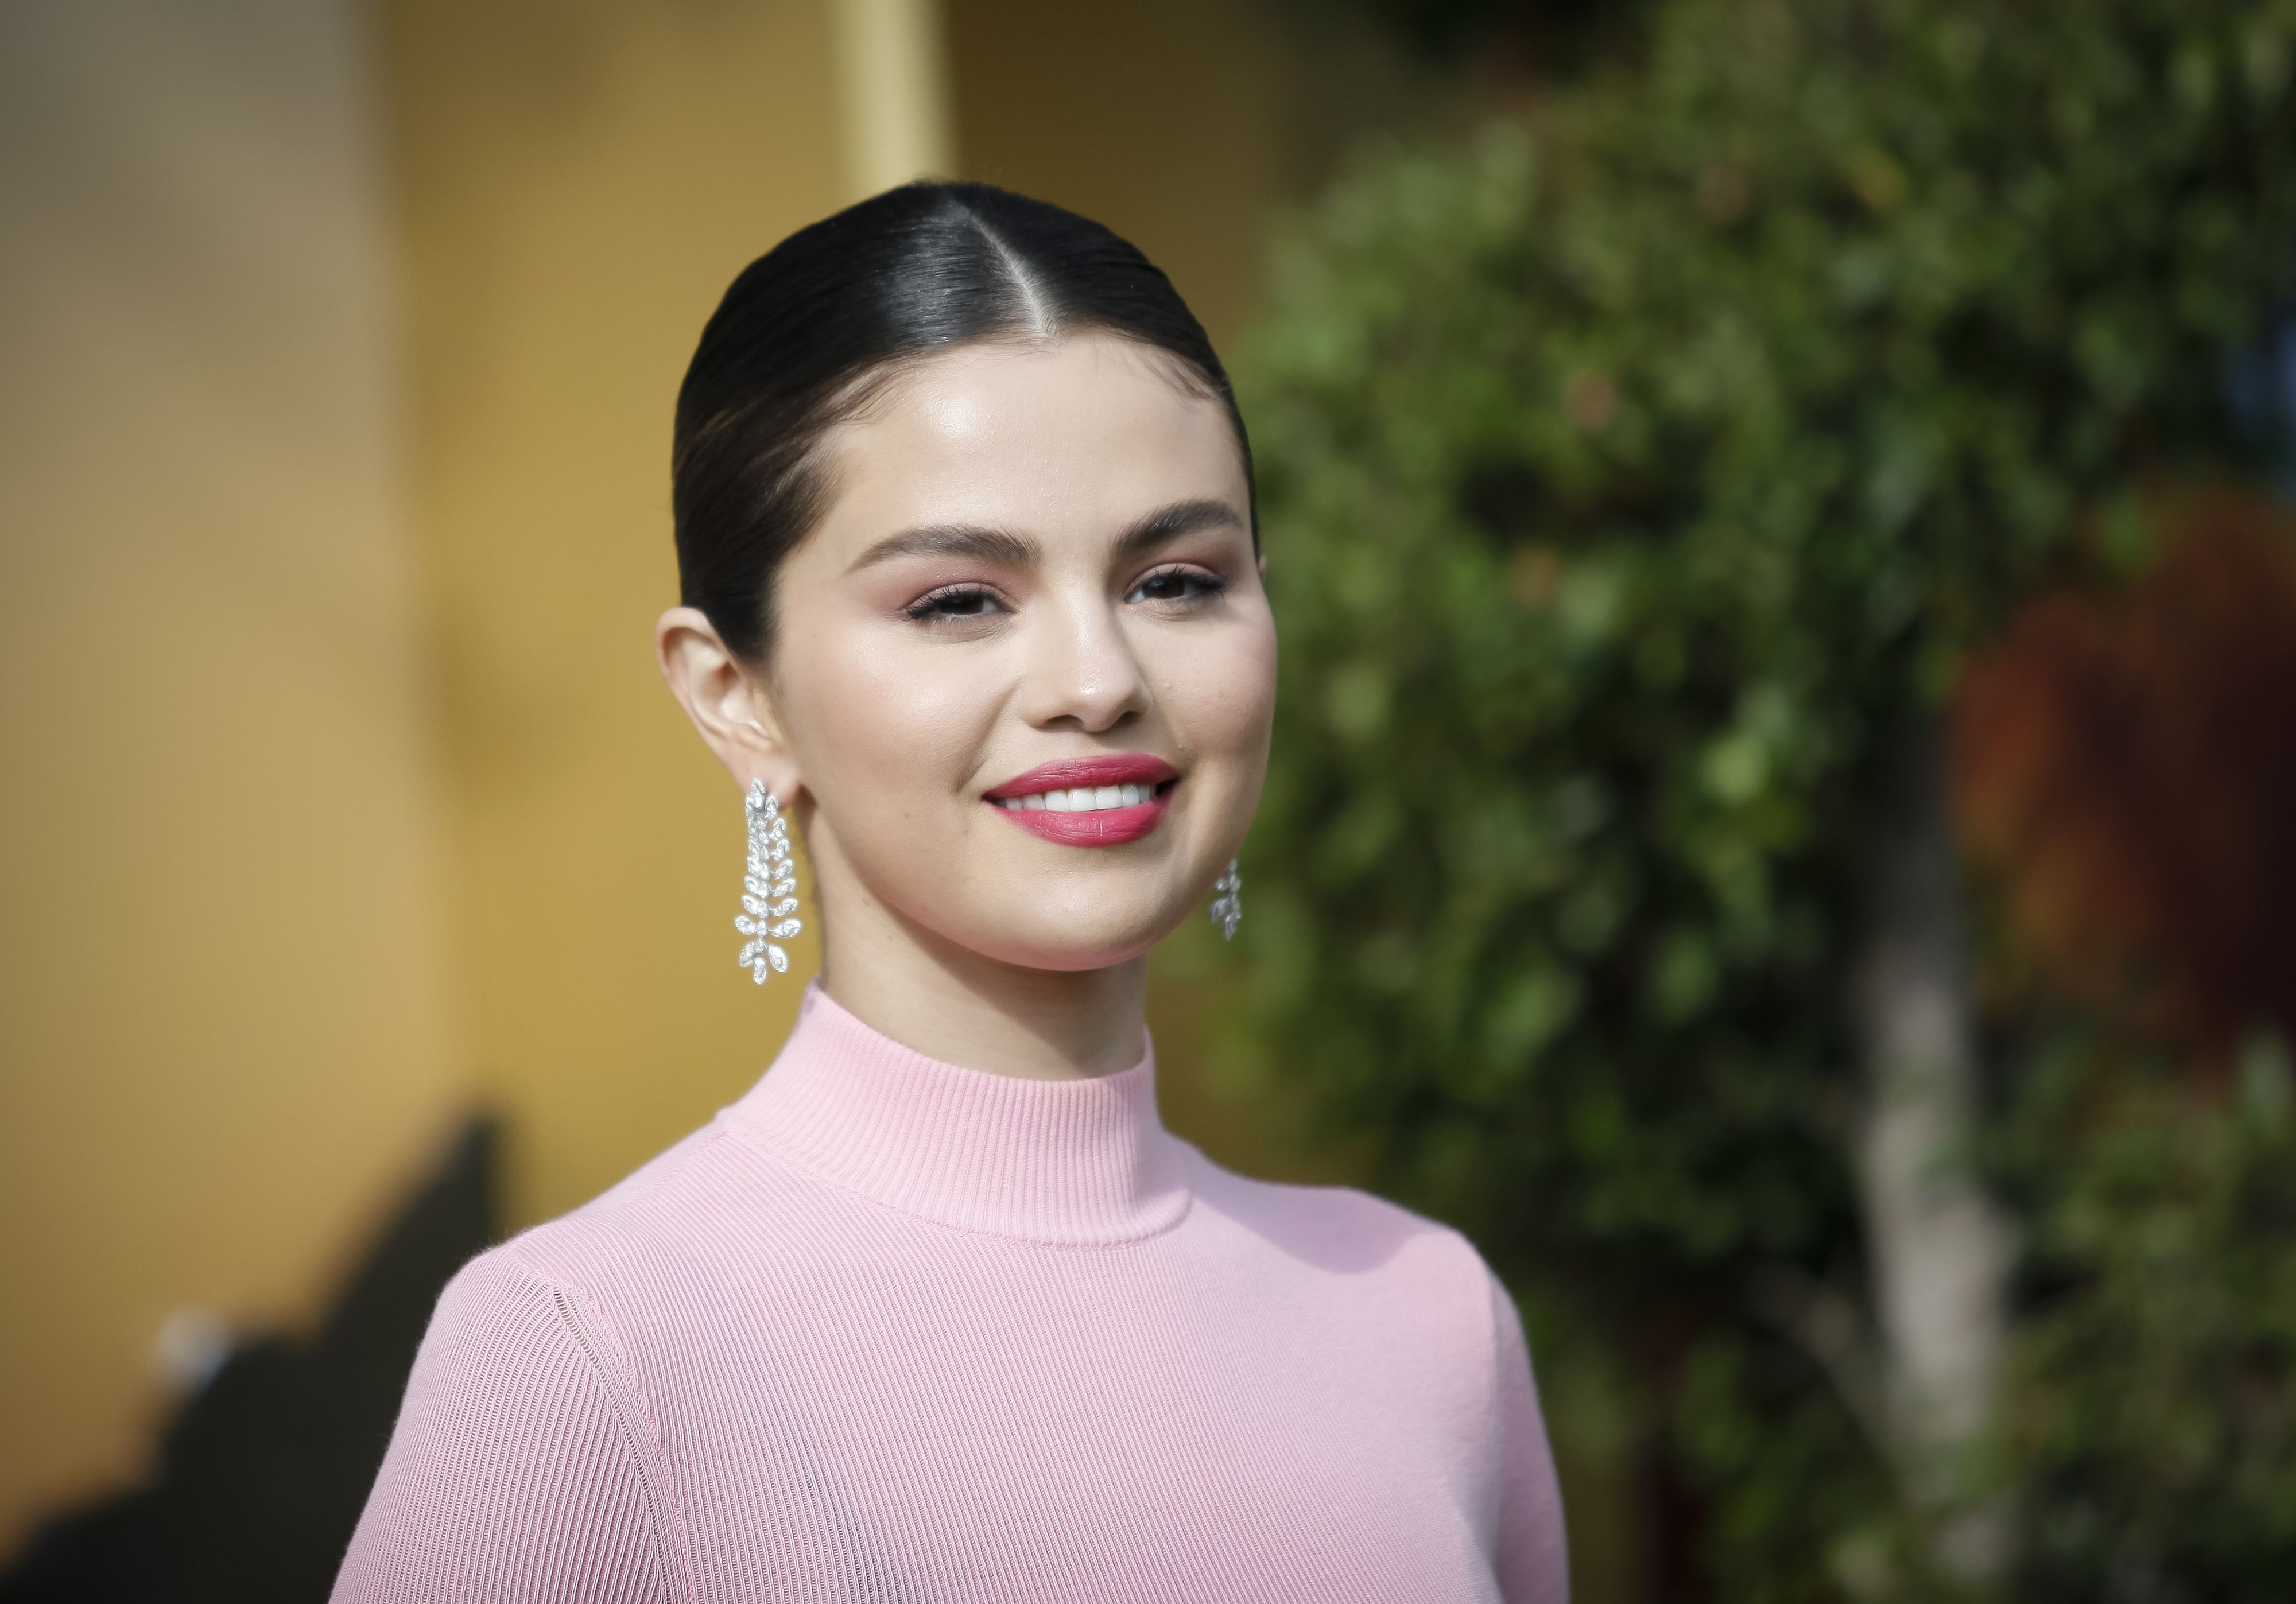 Free Vintage Porn Videos Selena Gomez - Selena Gomez has chunky braids and head-to-toe leather in new pic